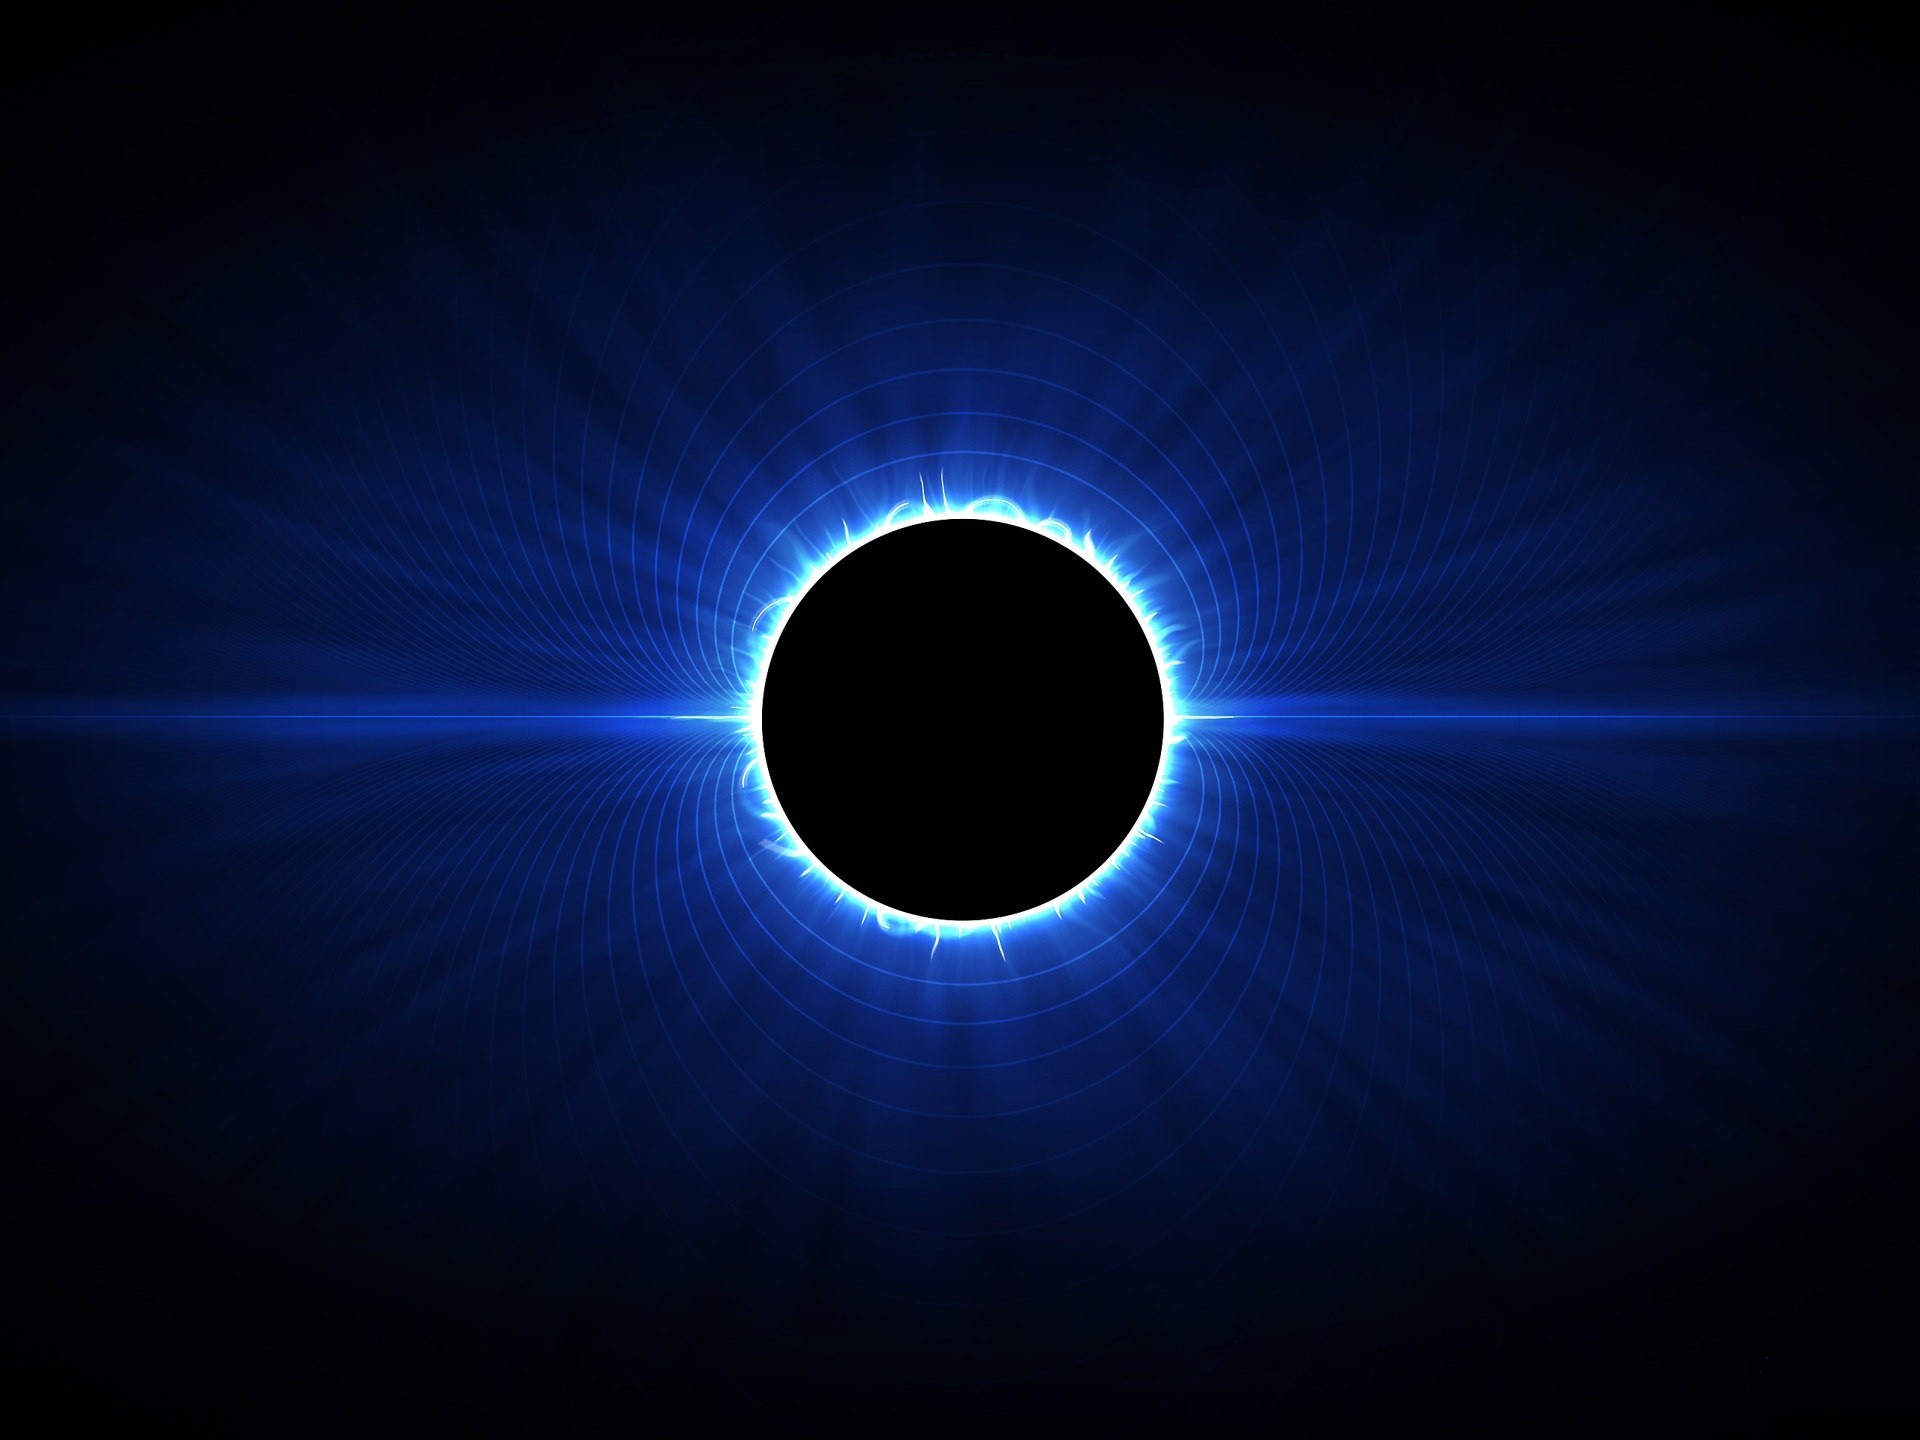 1920x1440 Awesome Free Circle Pictures | Free Circle Wallpapers